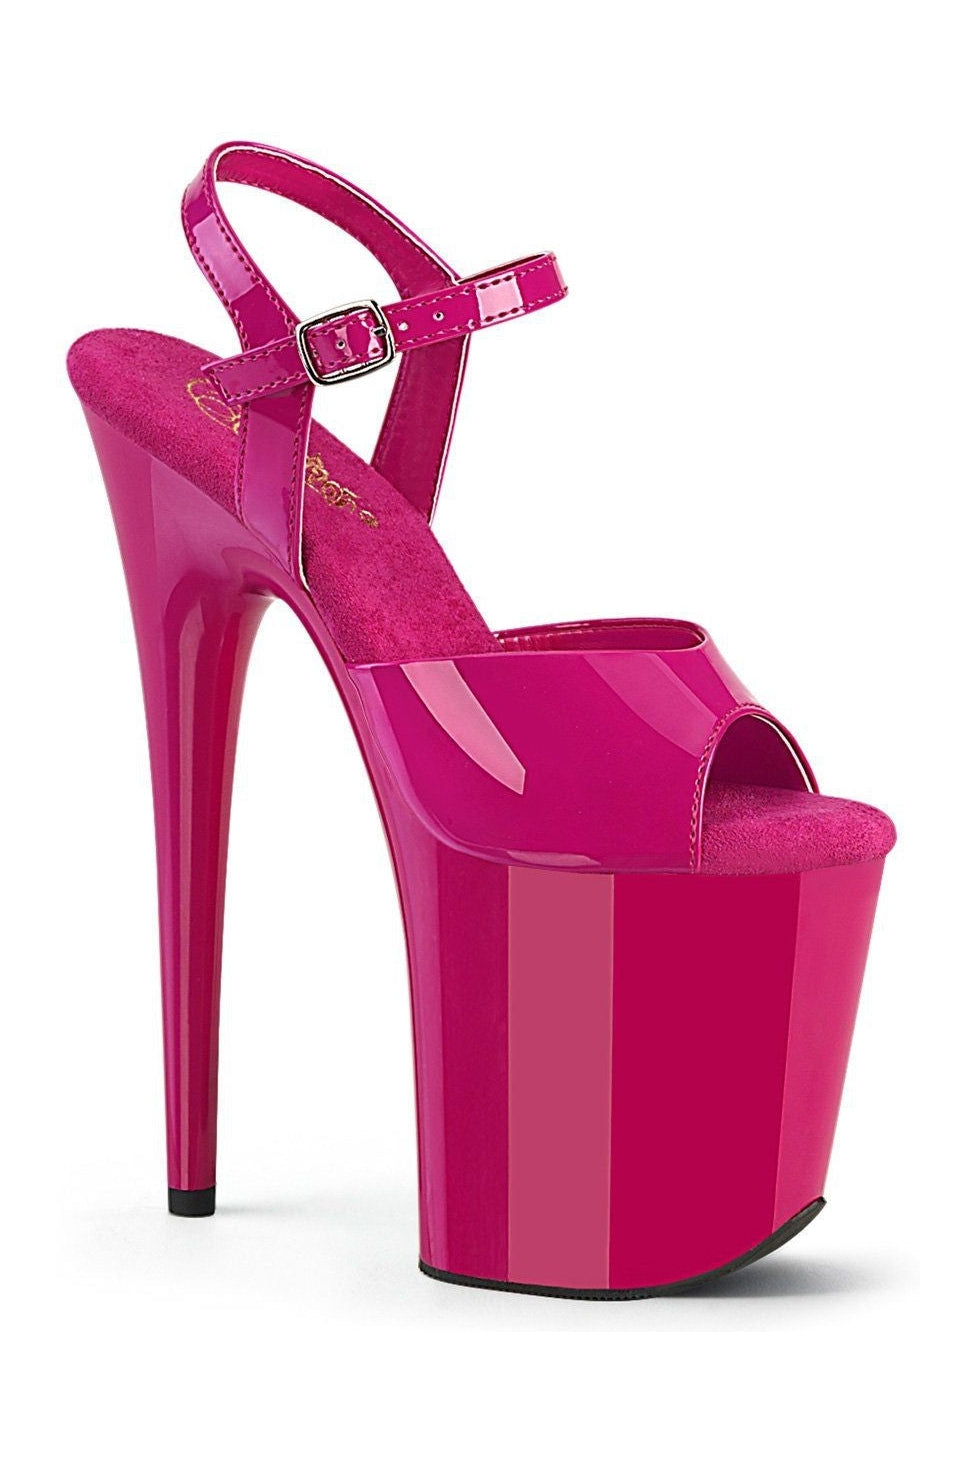 Pleaser Fuchsia Sandals Platform Stripper Shoes | Buy at Sexyshoes.com